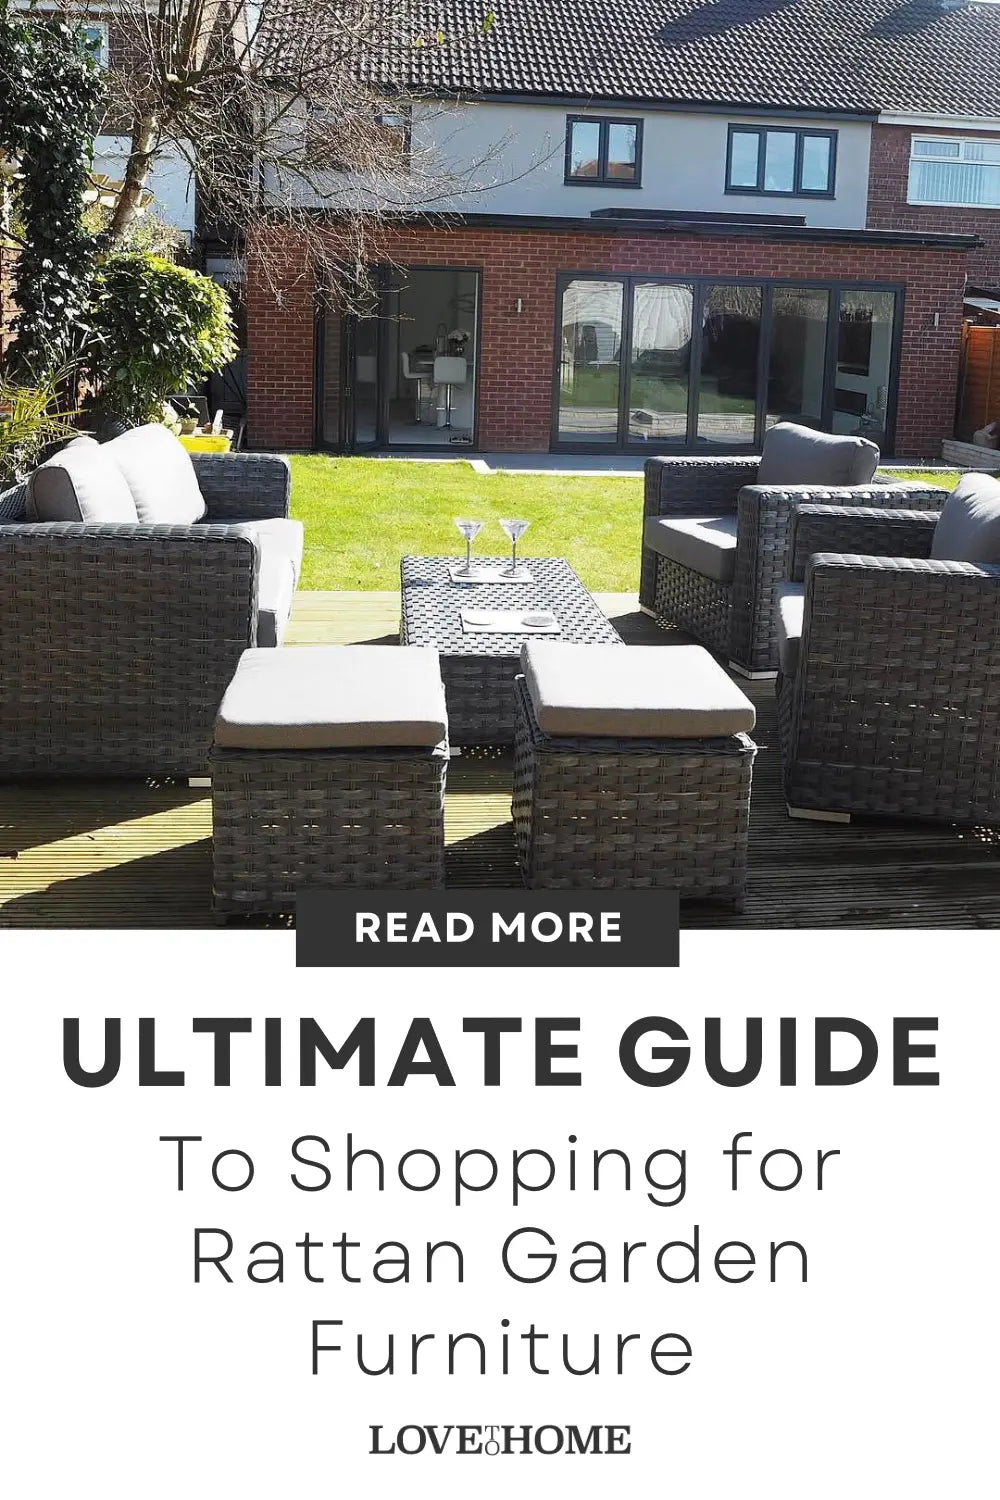 The Ultimate Guide to Shopping for Rattan Garden Furniture